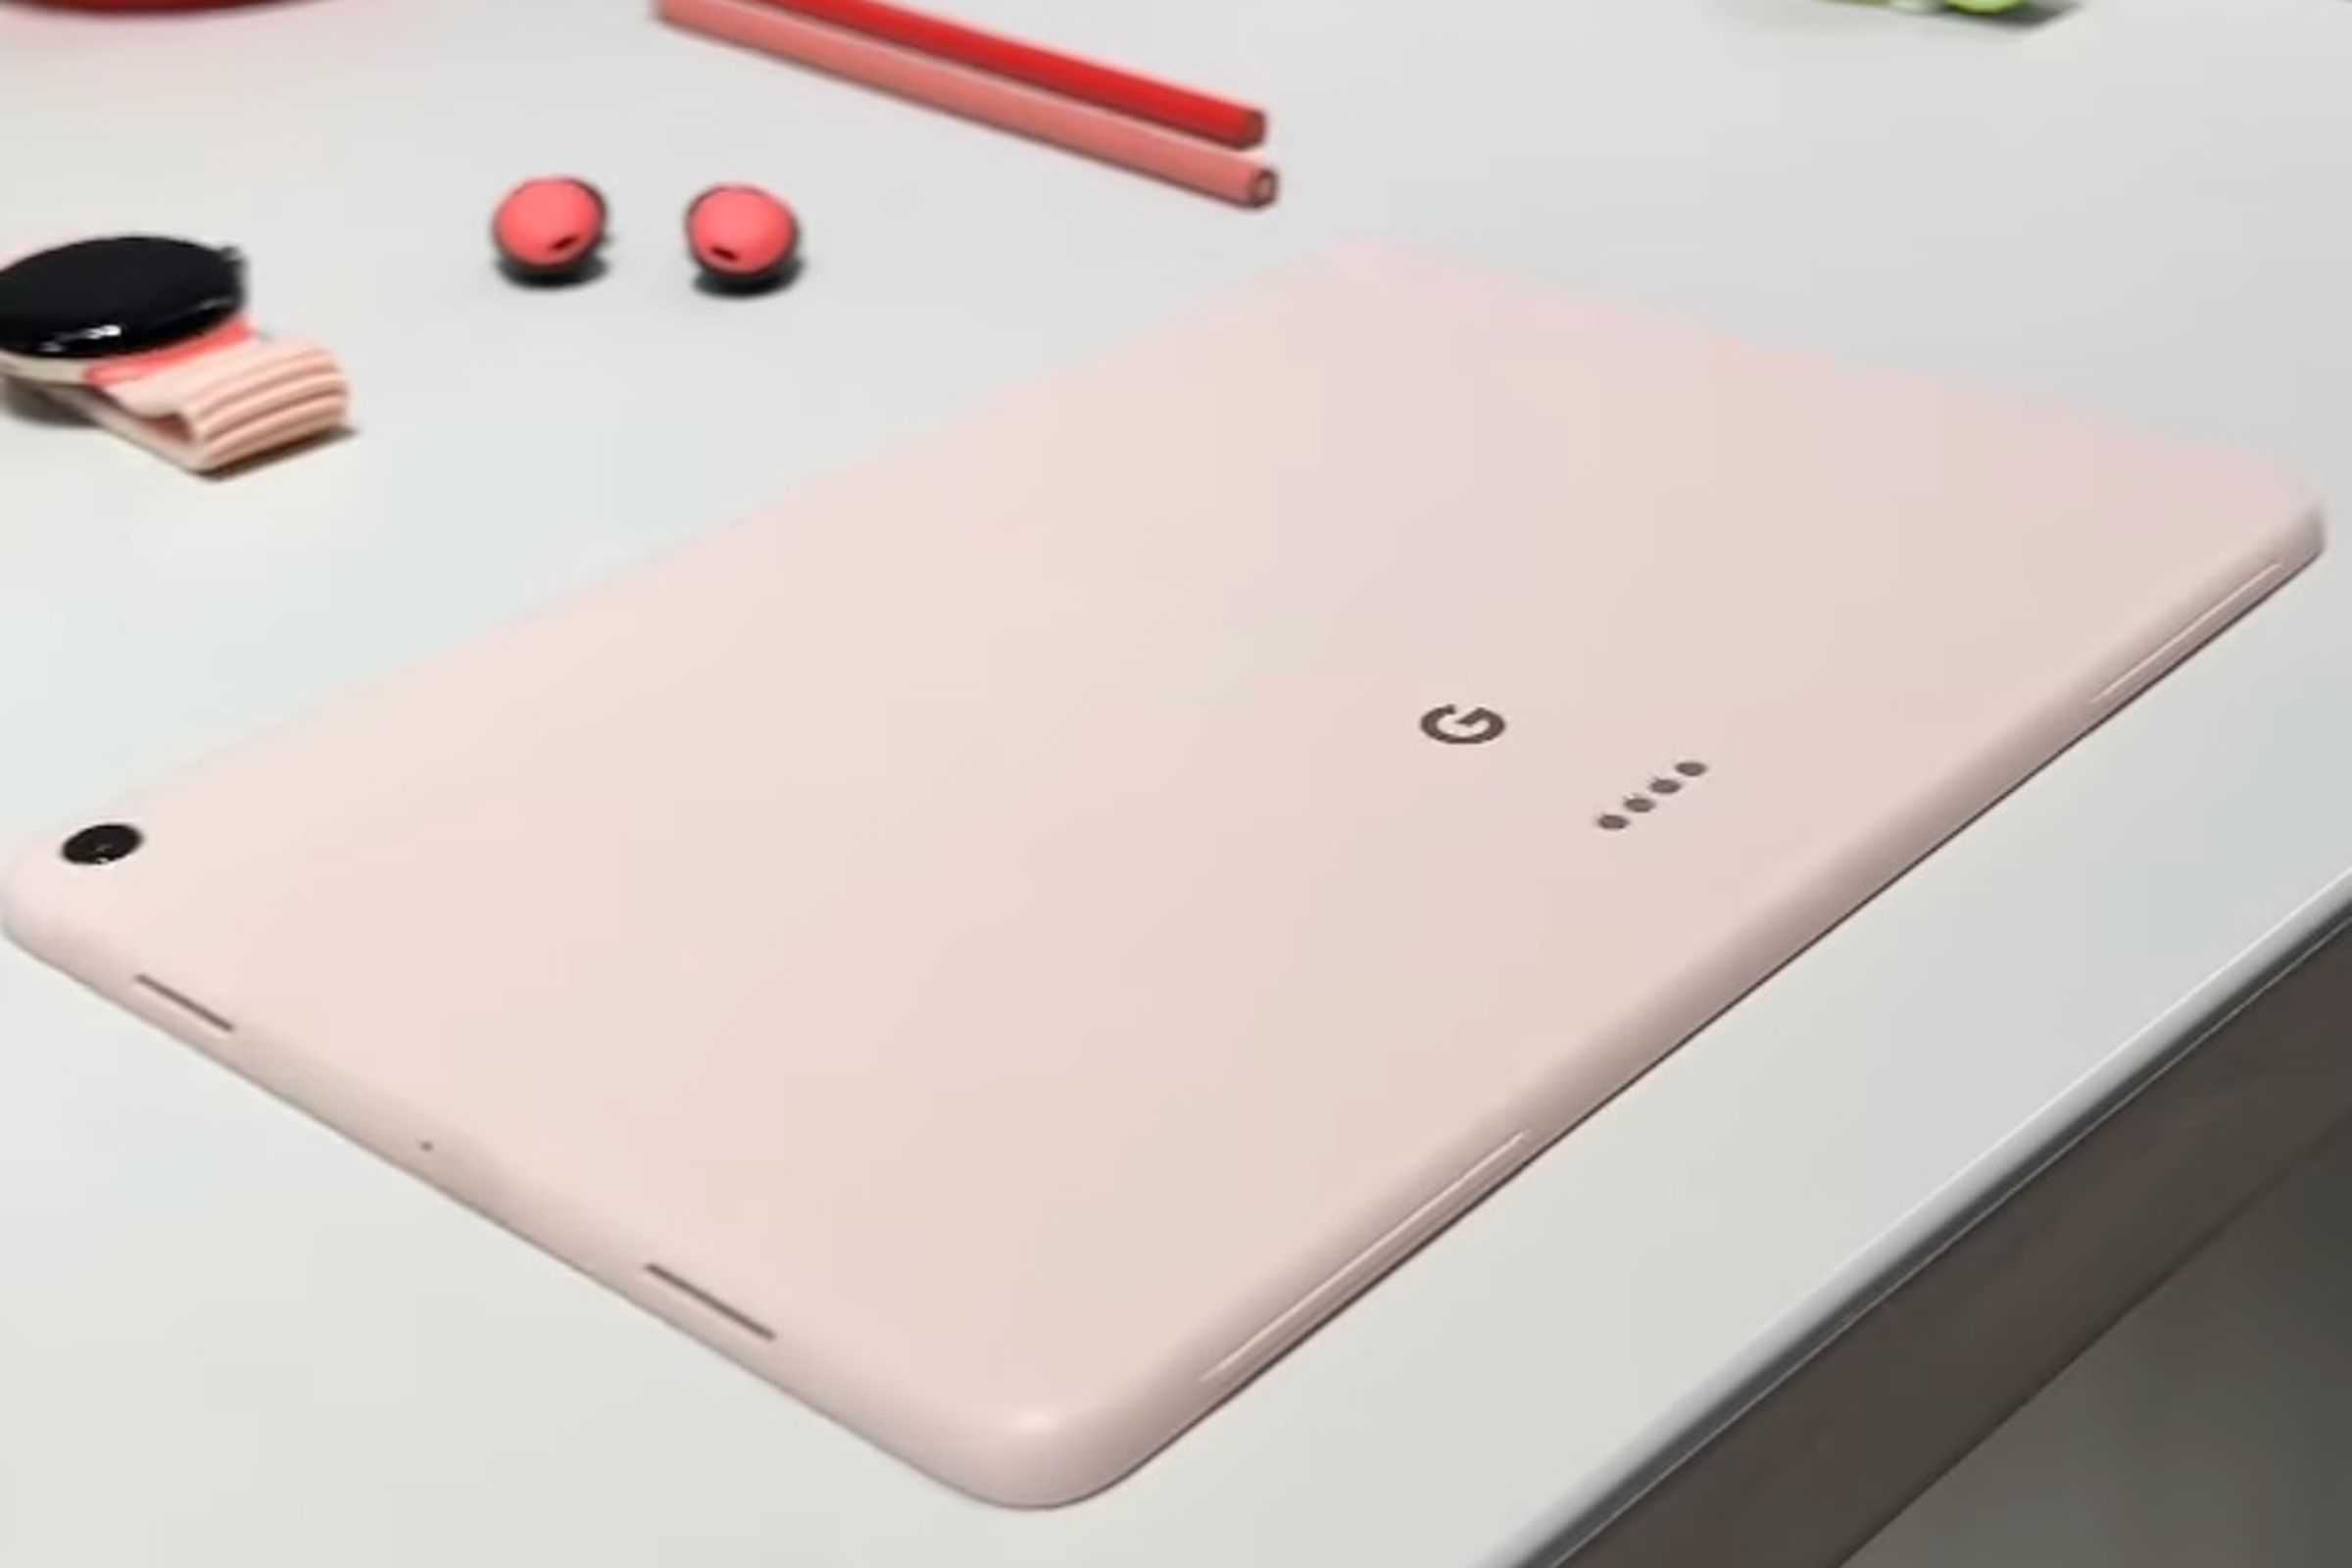 A screenshot of the Pixel Tablet in a coral color.